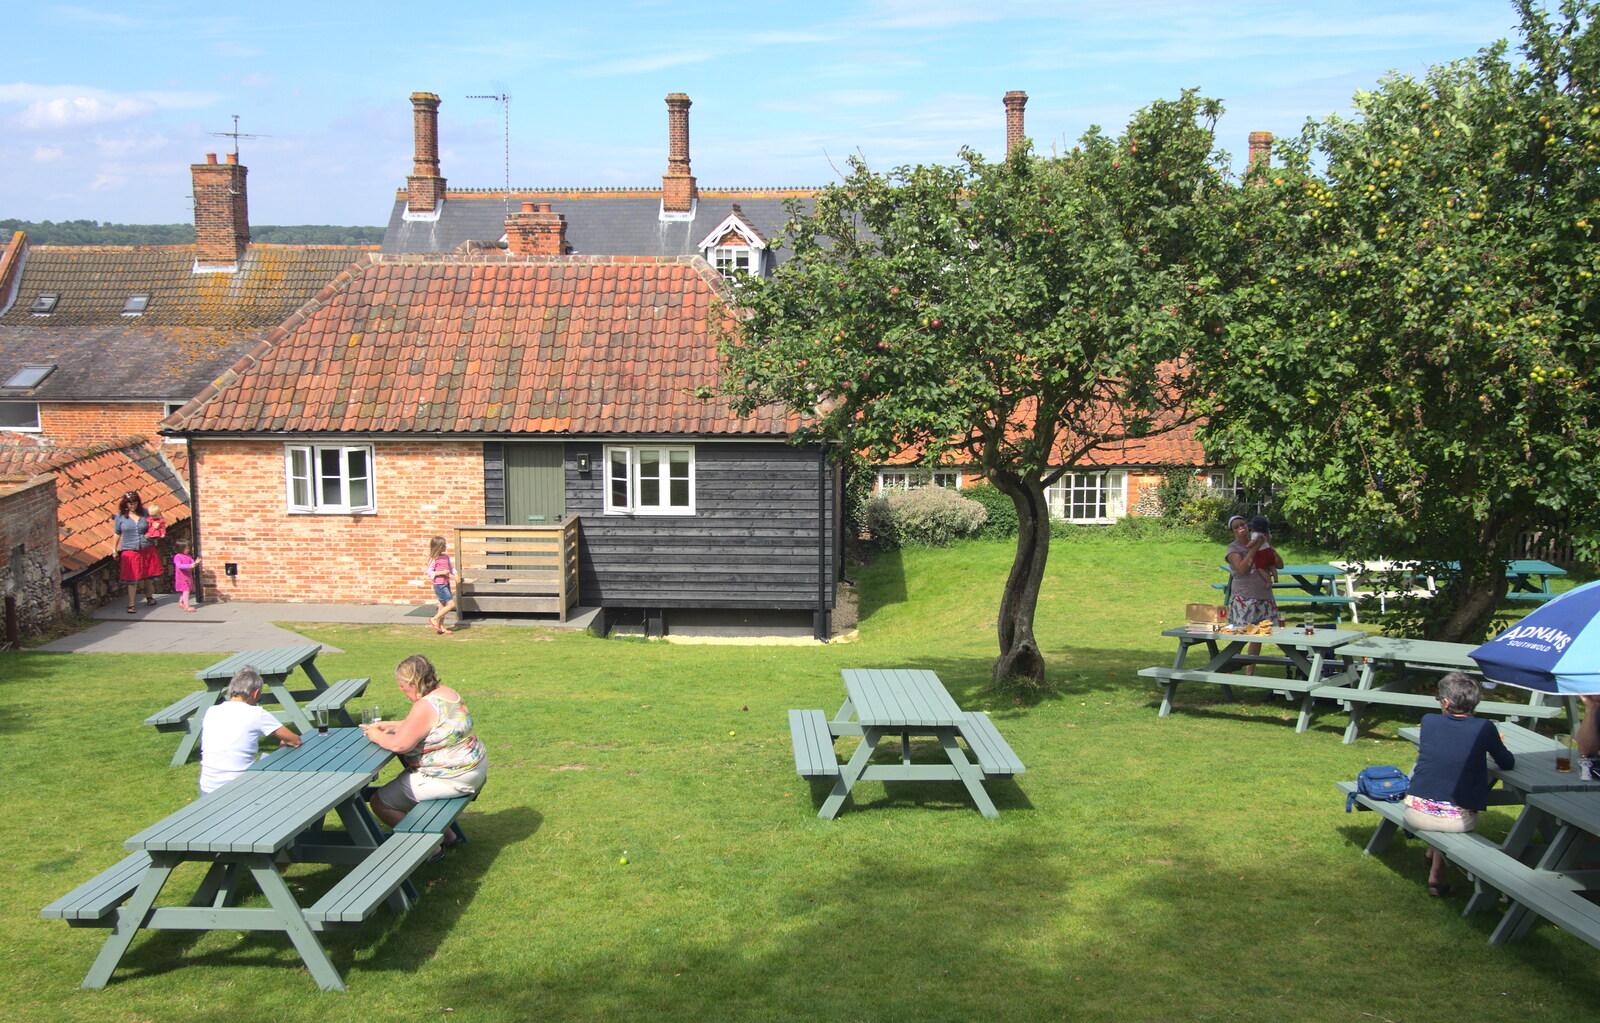 The Dunwich Ship's beer garden from Camping by the Seaside, Cliff House, Dunwich, Suffolk - 15th August 2012